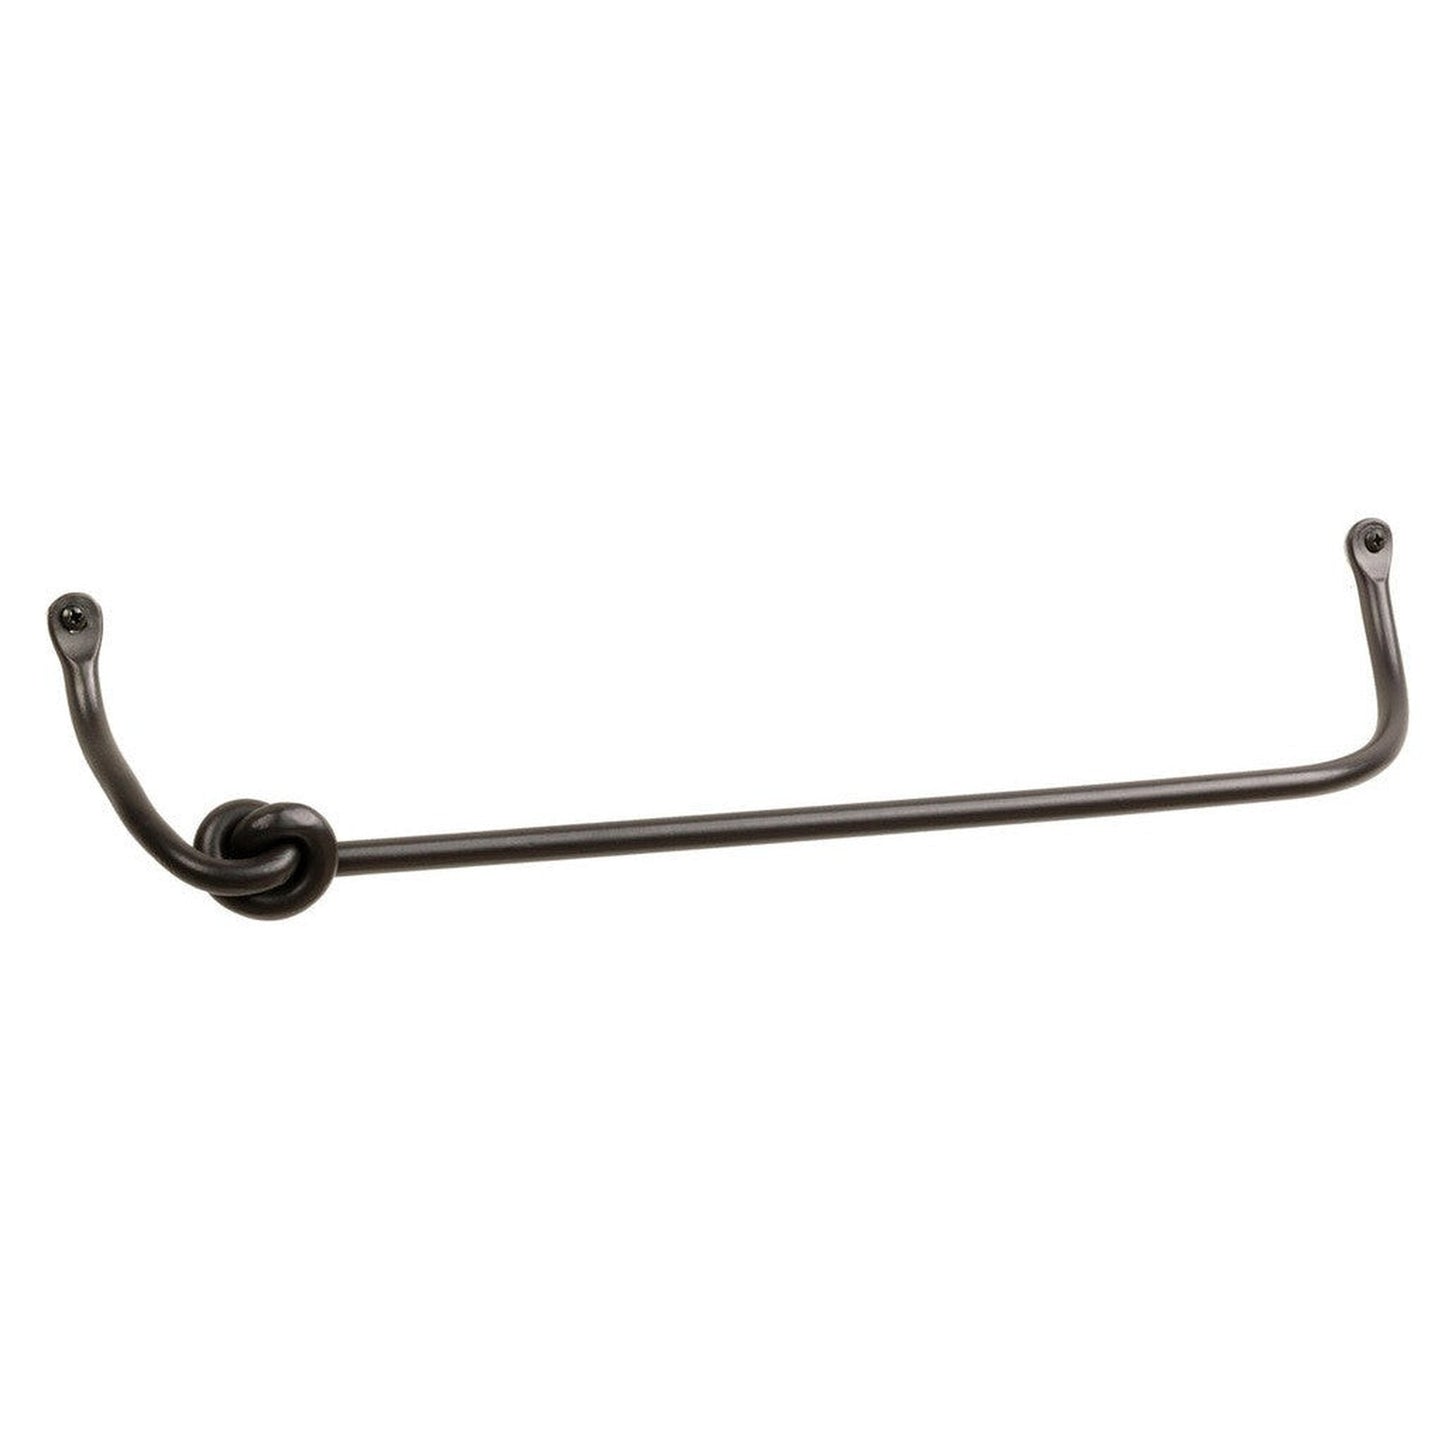 Stone County Ironworks Knot 24" Natural Black Iron Towel Bar With Copper Iron Accent